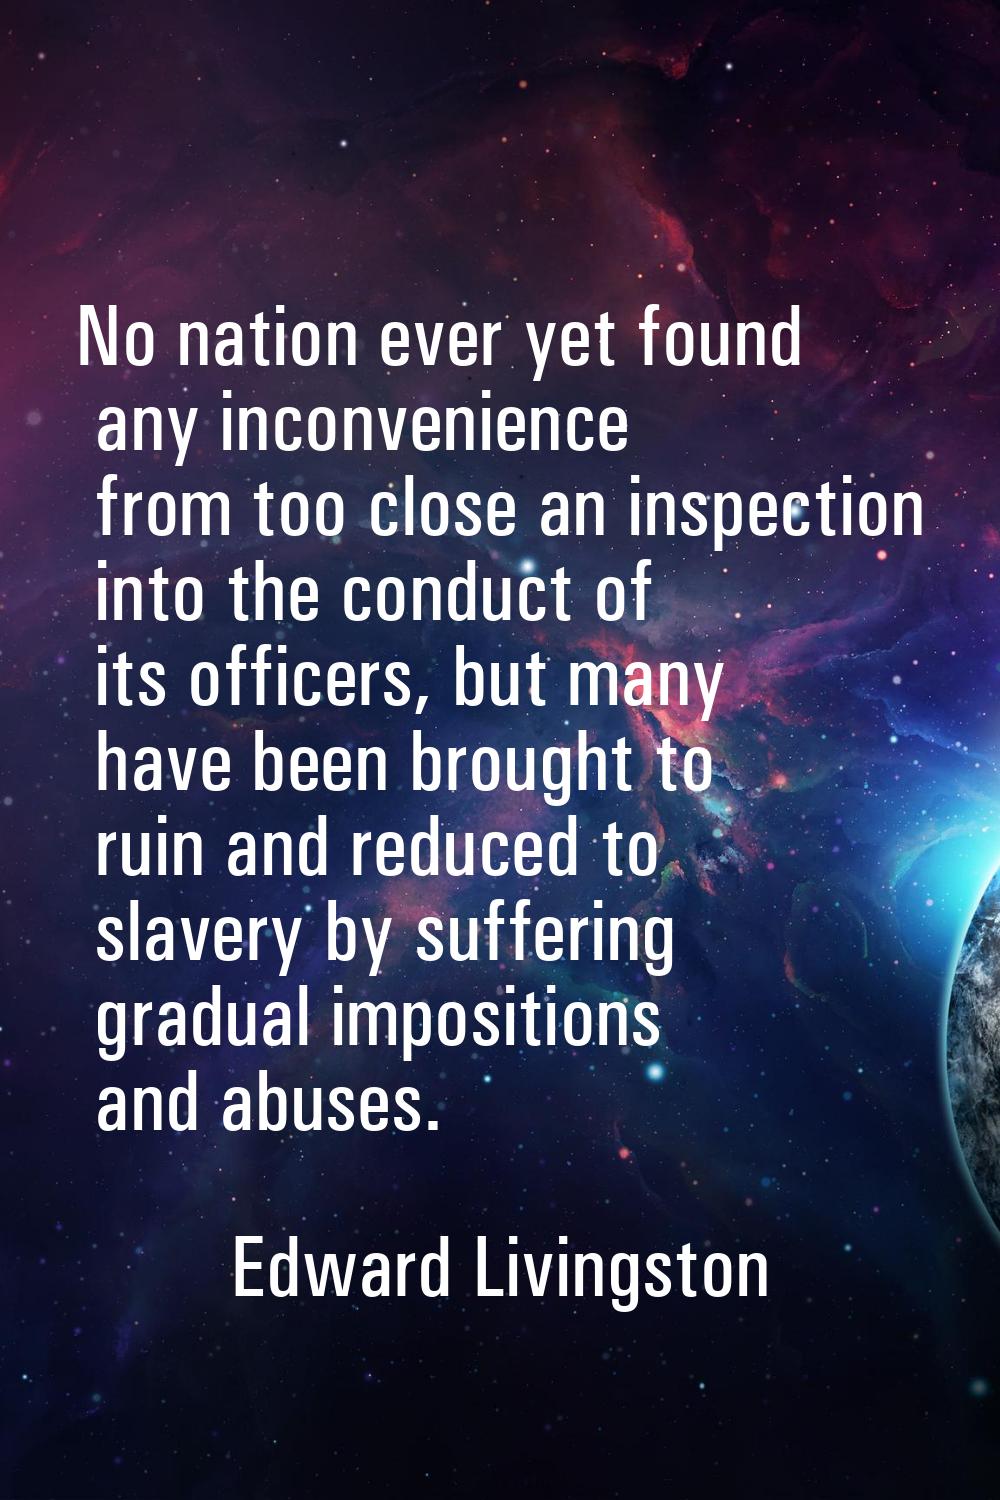 No nation ever yet found any inconvenience from too close an inspection into the conduct of its off